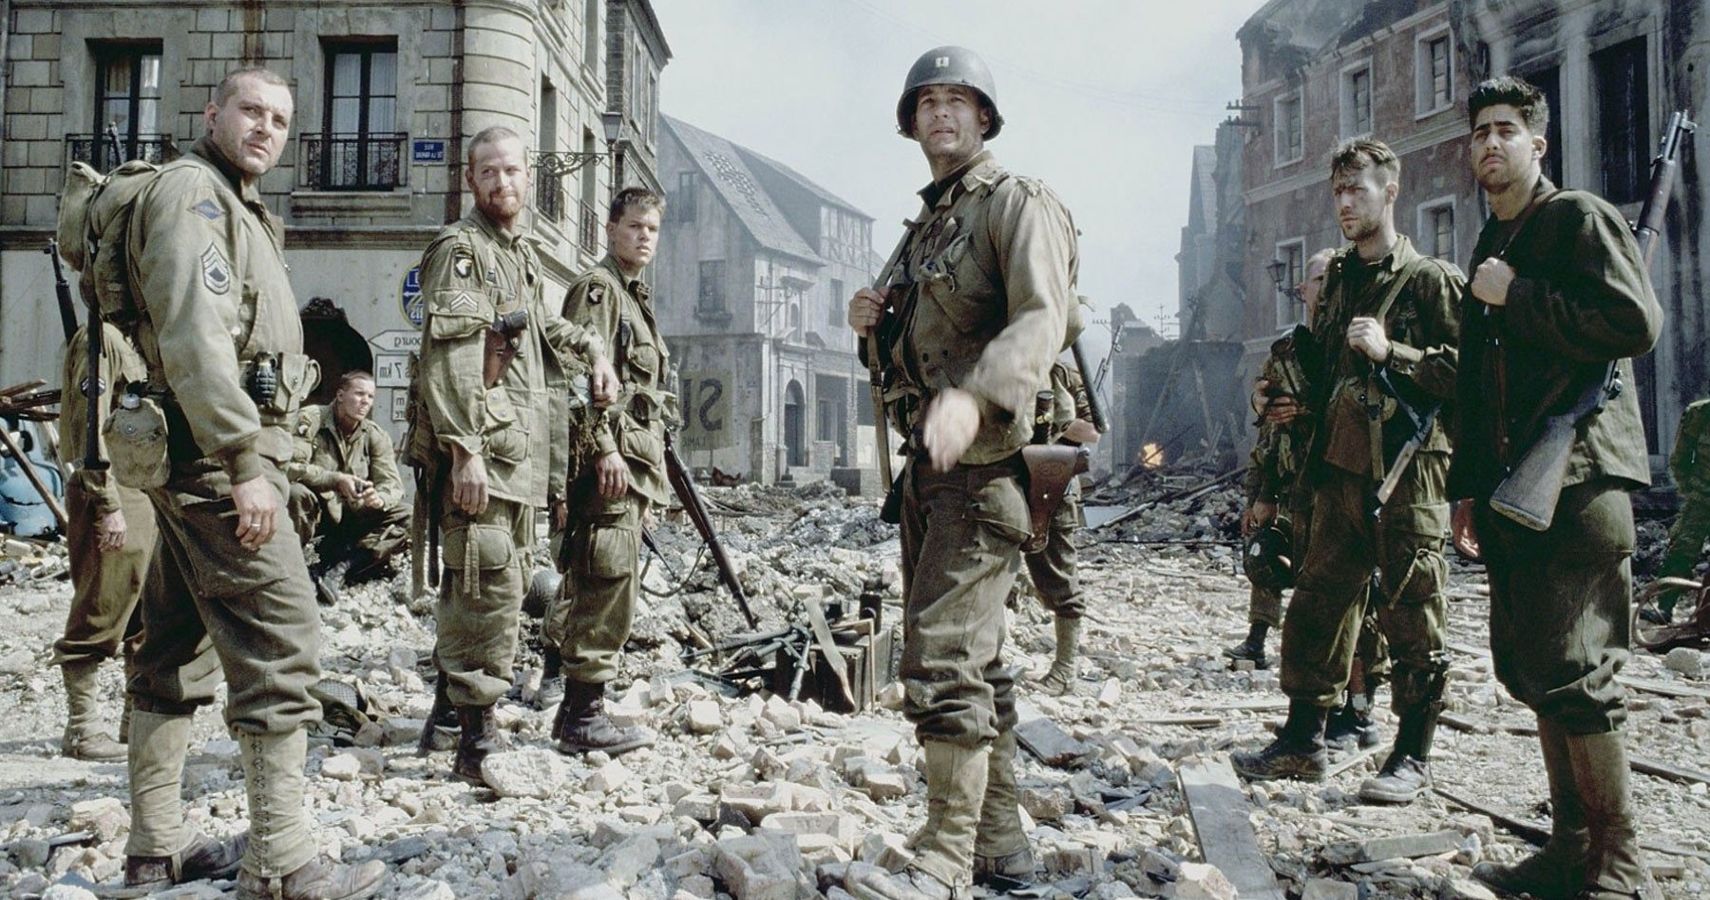 10 Misconceptions About World War 2 That The Movies Keep Perpetuating